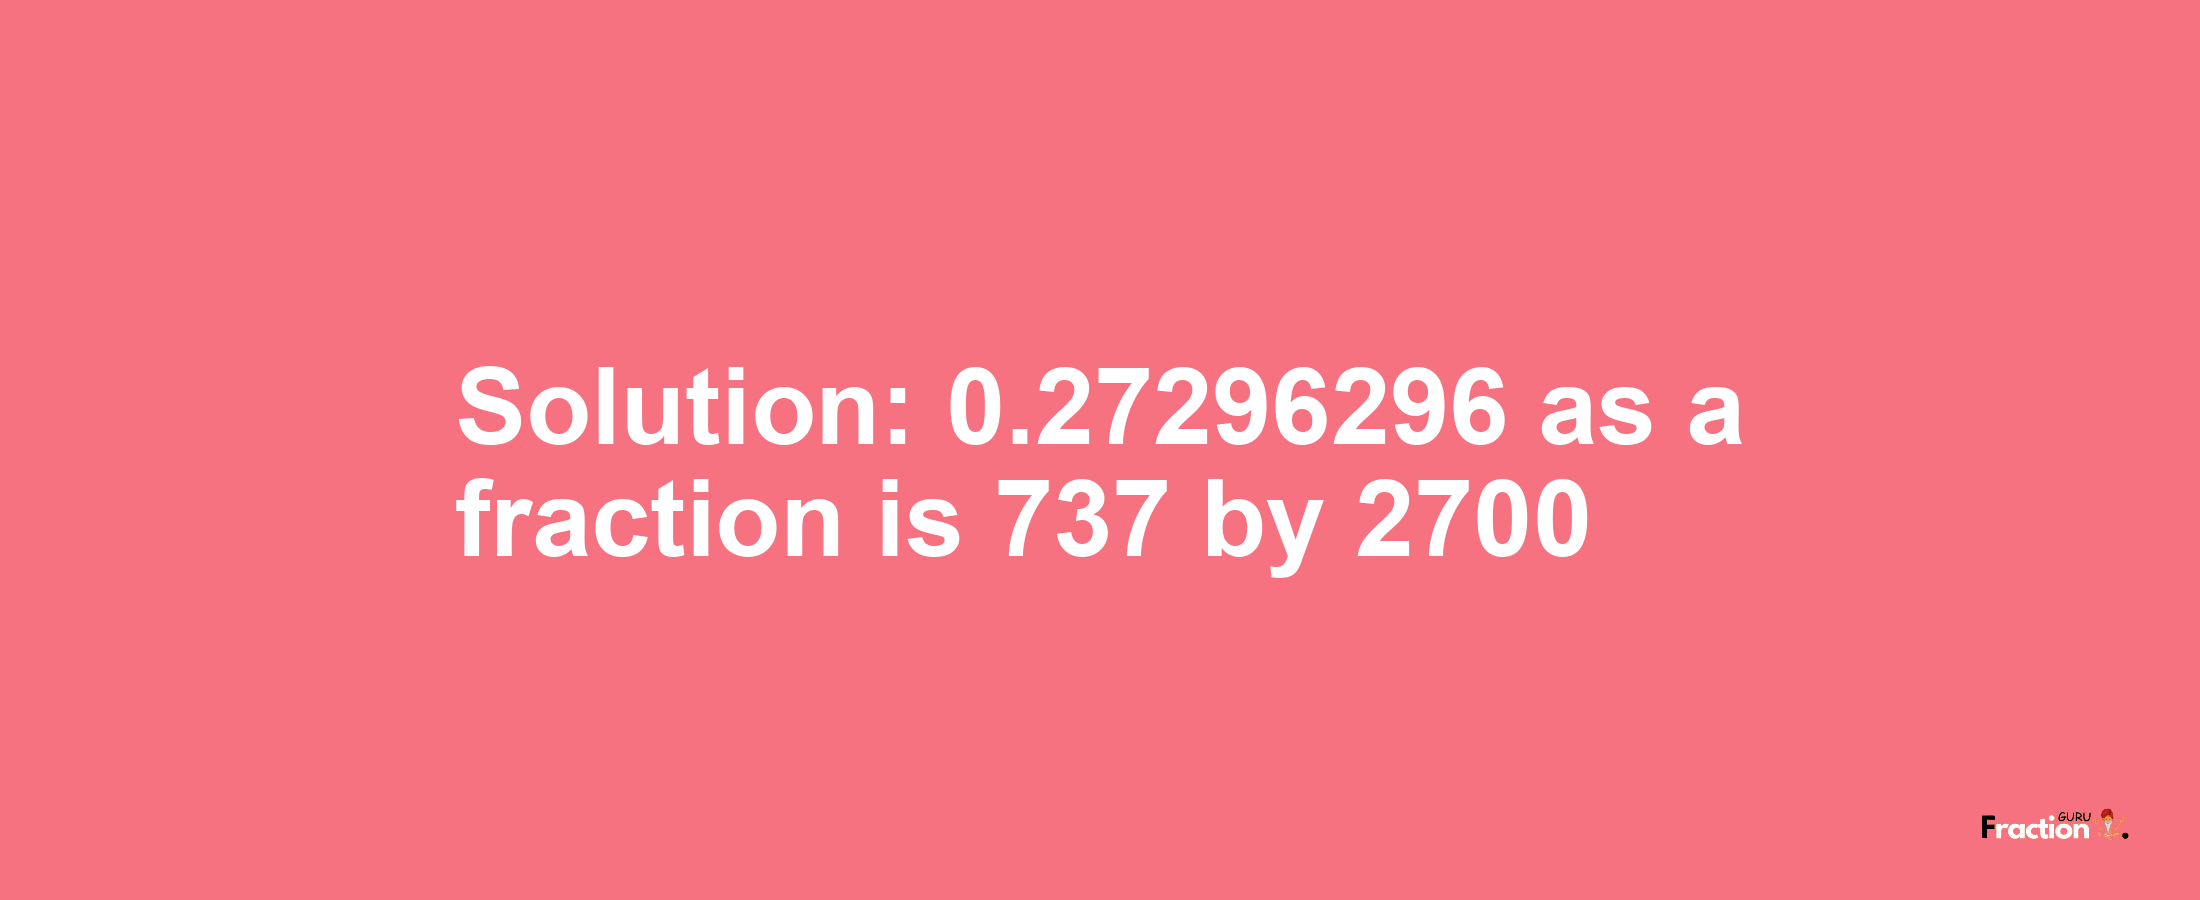 Solution:0.27296296 as a fraction is 737/2700